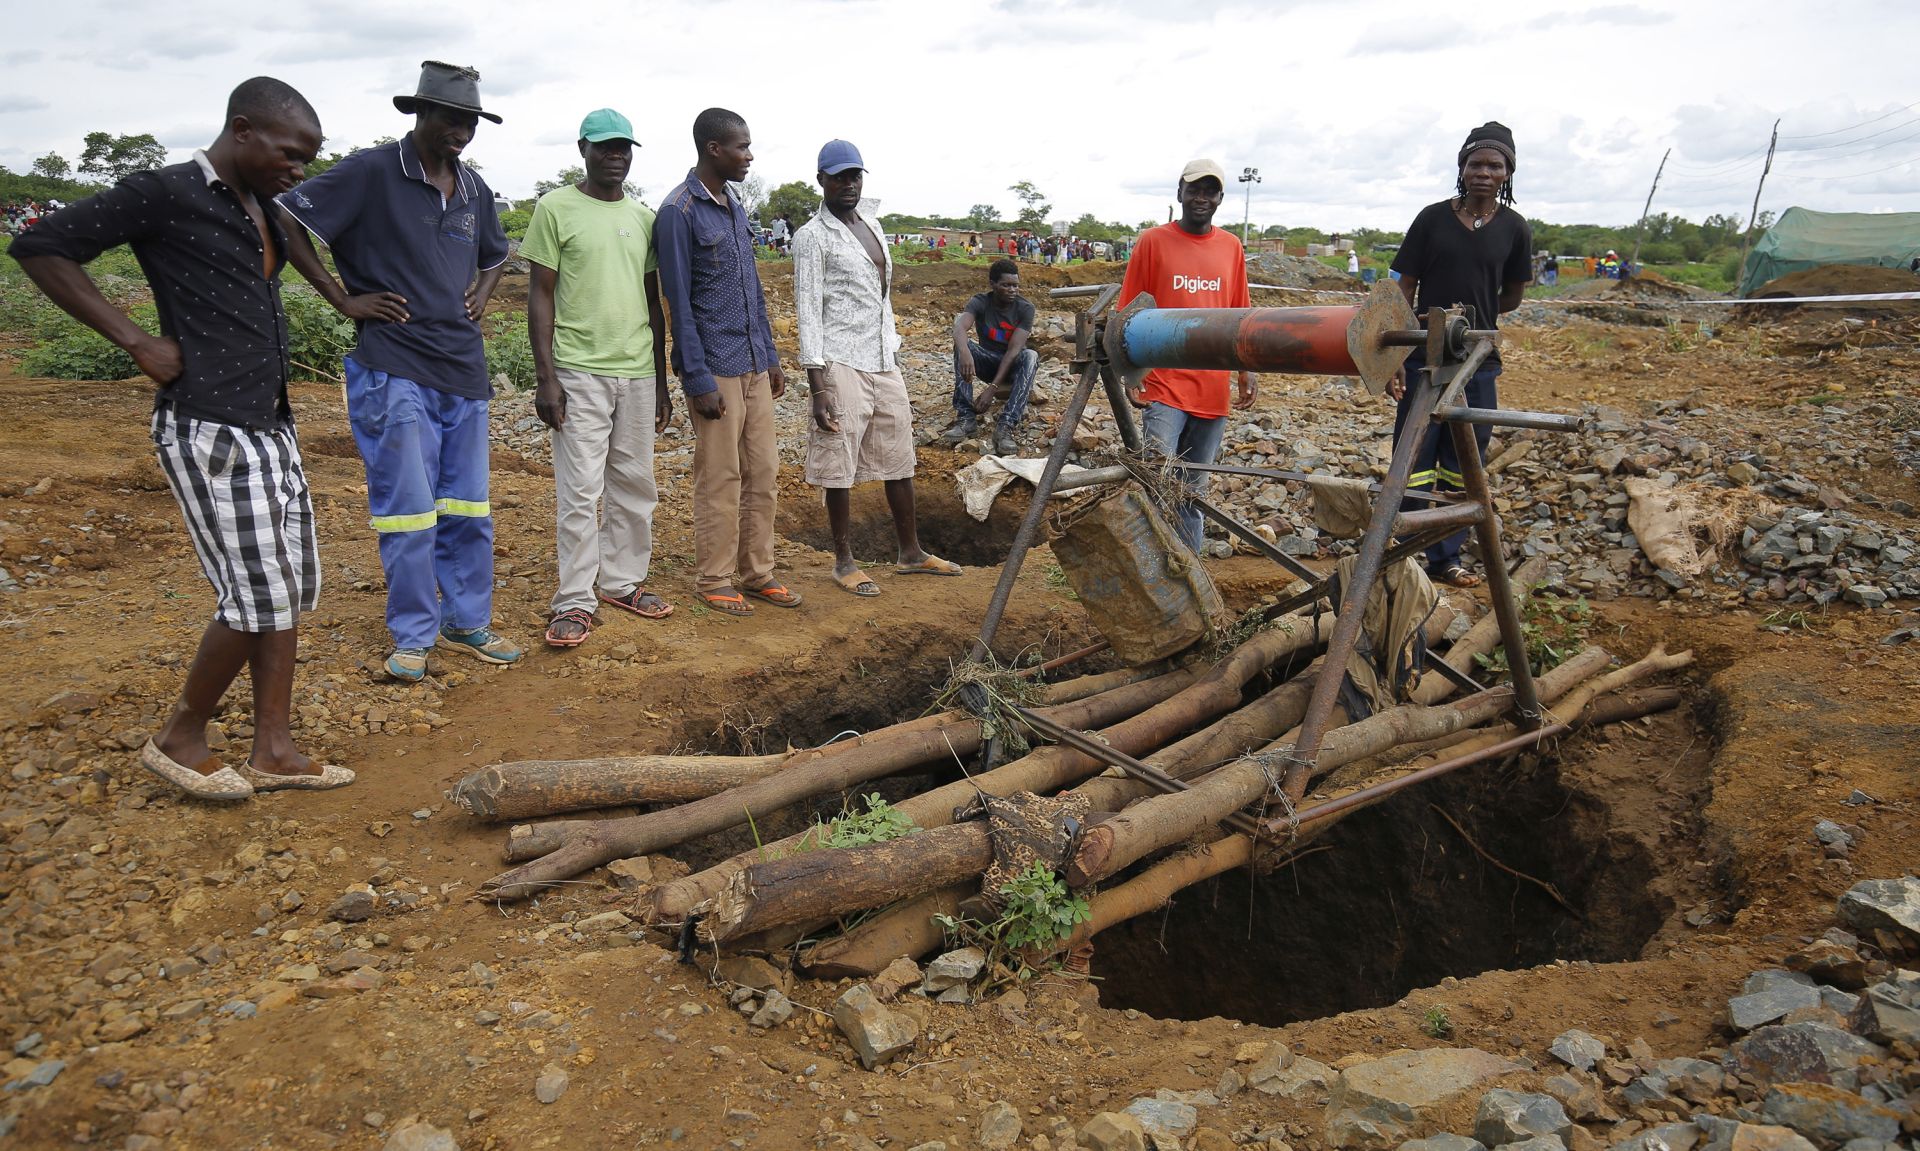 epa07369916 People gather around one of the shafts at Cricket Mine outside Kadoma more than 200 km west of the capital Harare, Zimbabwe, 14 February 2019 where more than 40 artisanal miners died on 12 February 2019.The miners died when the shafts in which they working in were flooded by raining water.Efforts are being made to pump out the water so that the bodies can be retrieved.  EPA/AARON UFUMELI